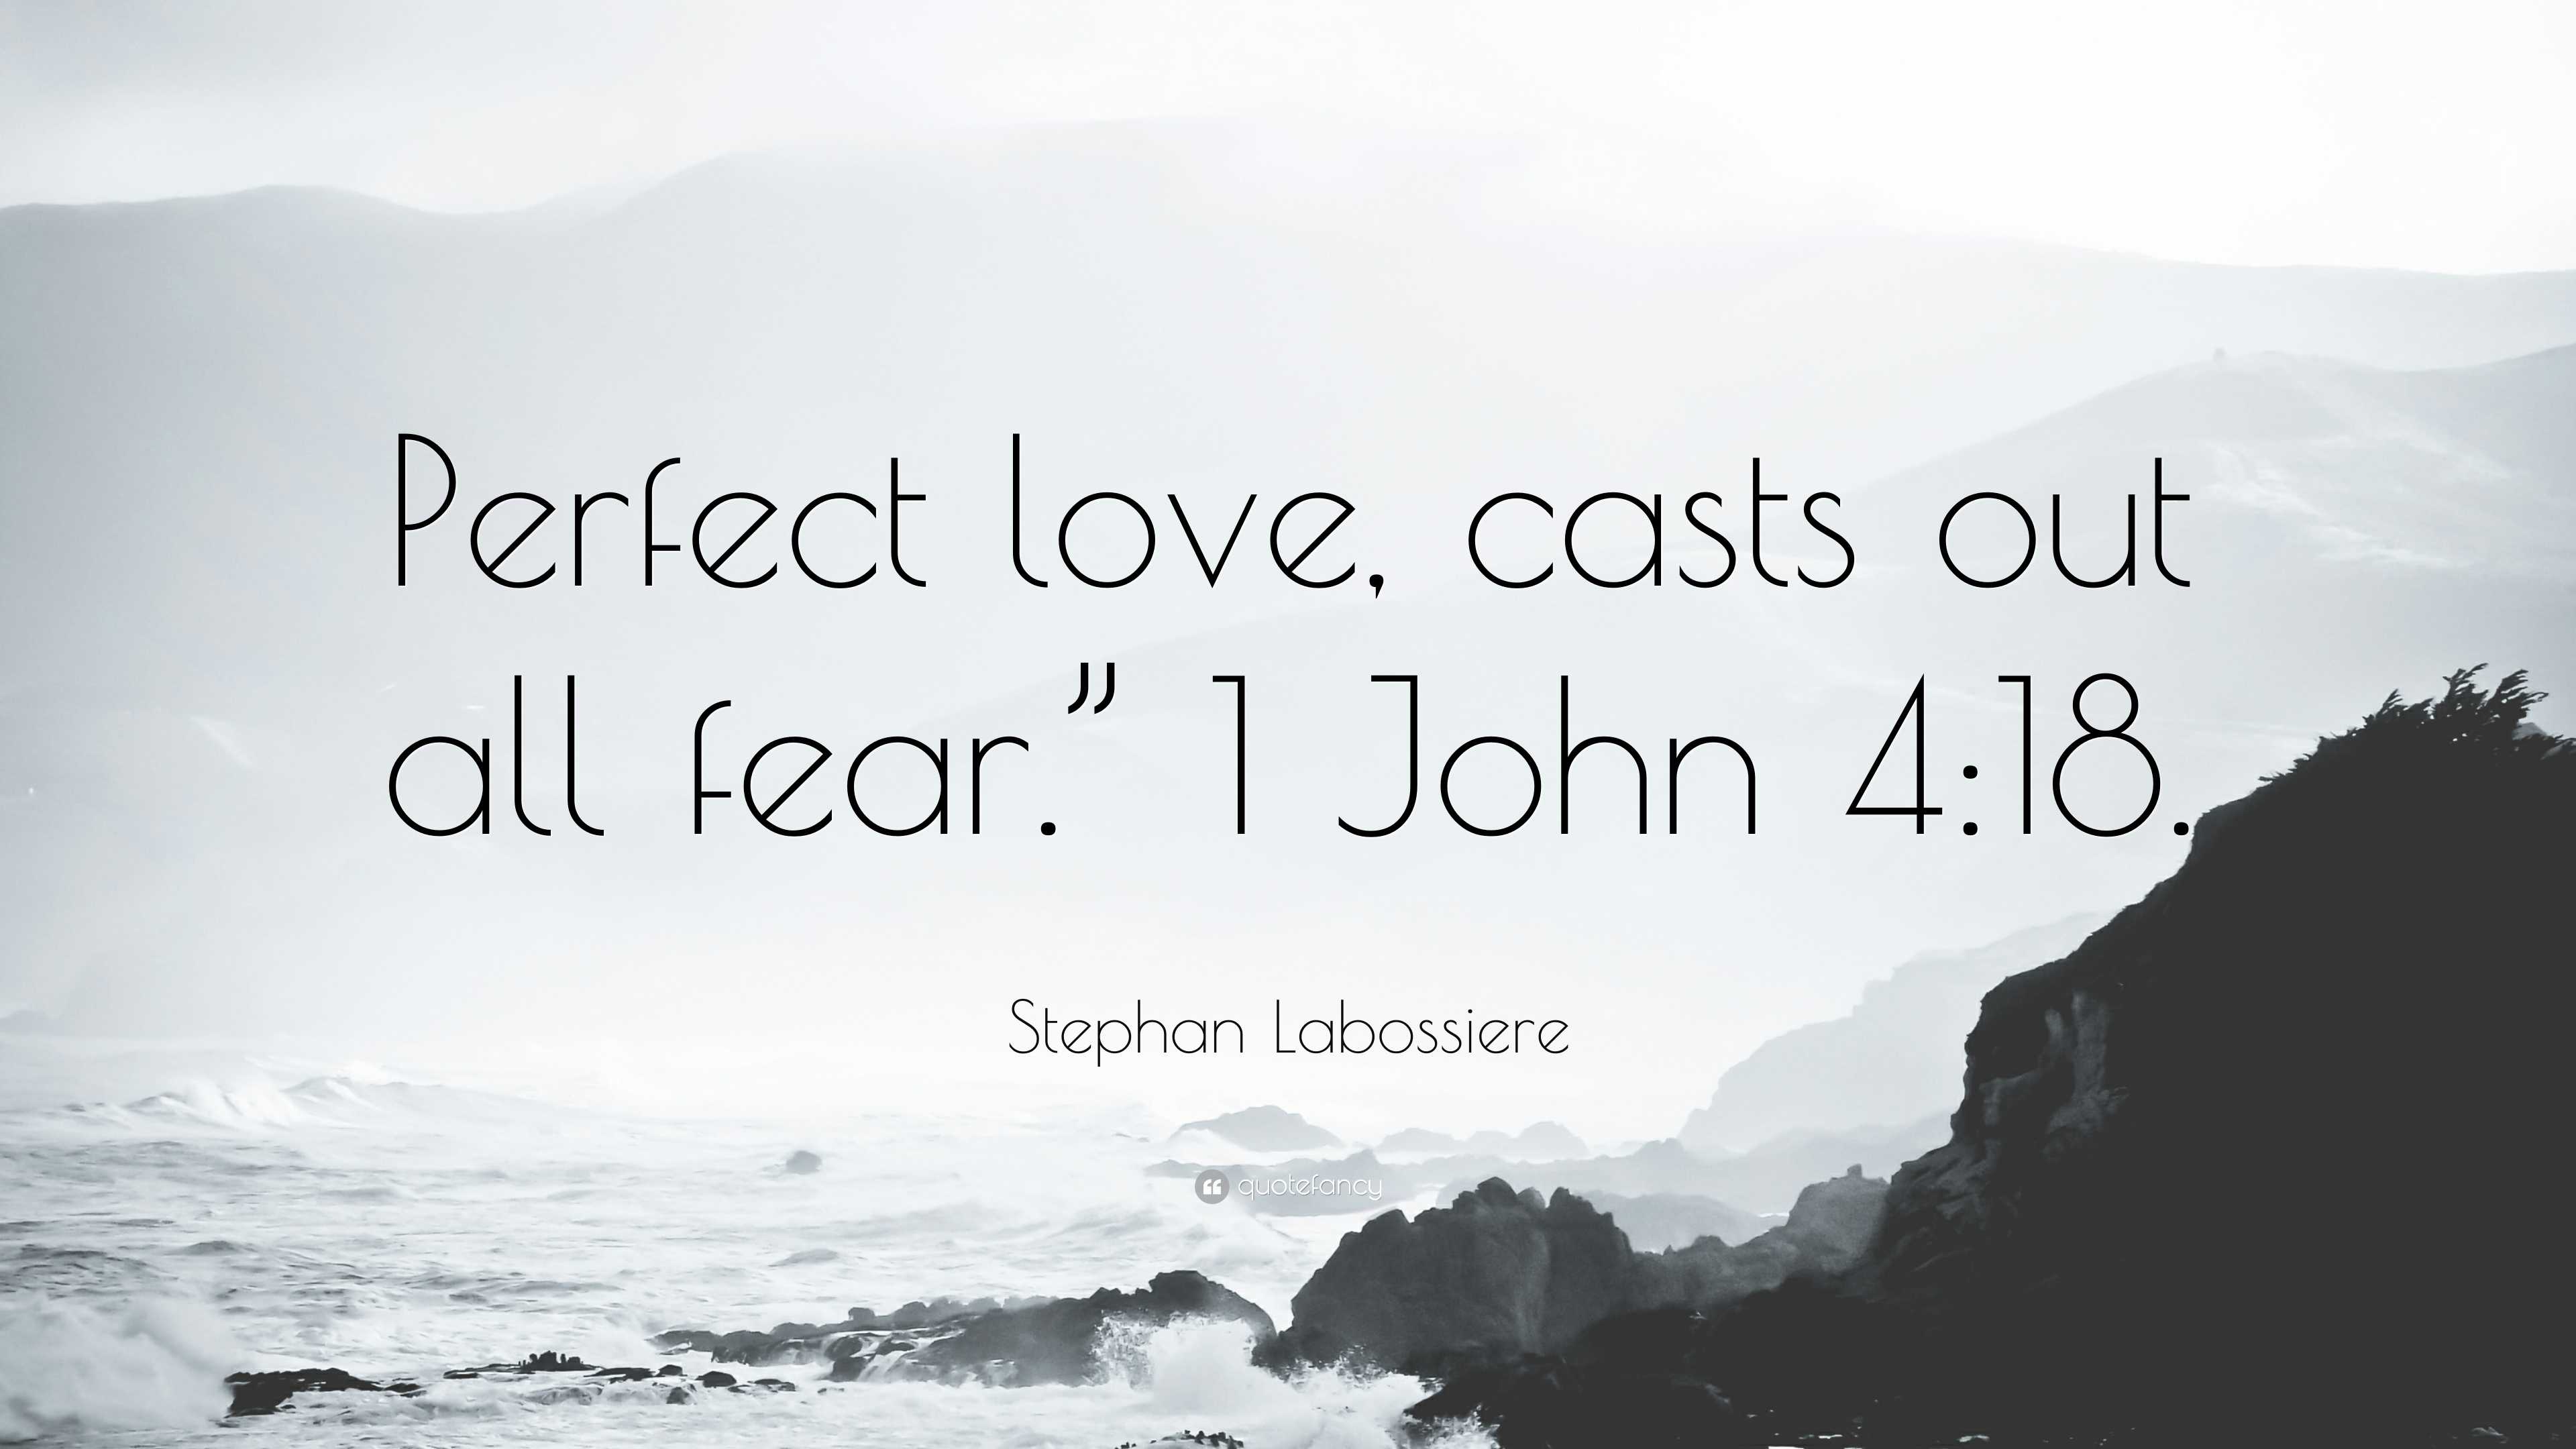 Stephan Labossiere Quote: “Perfect love, casts out all fear.” 1